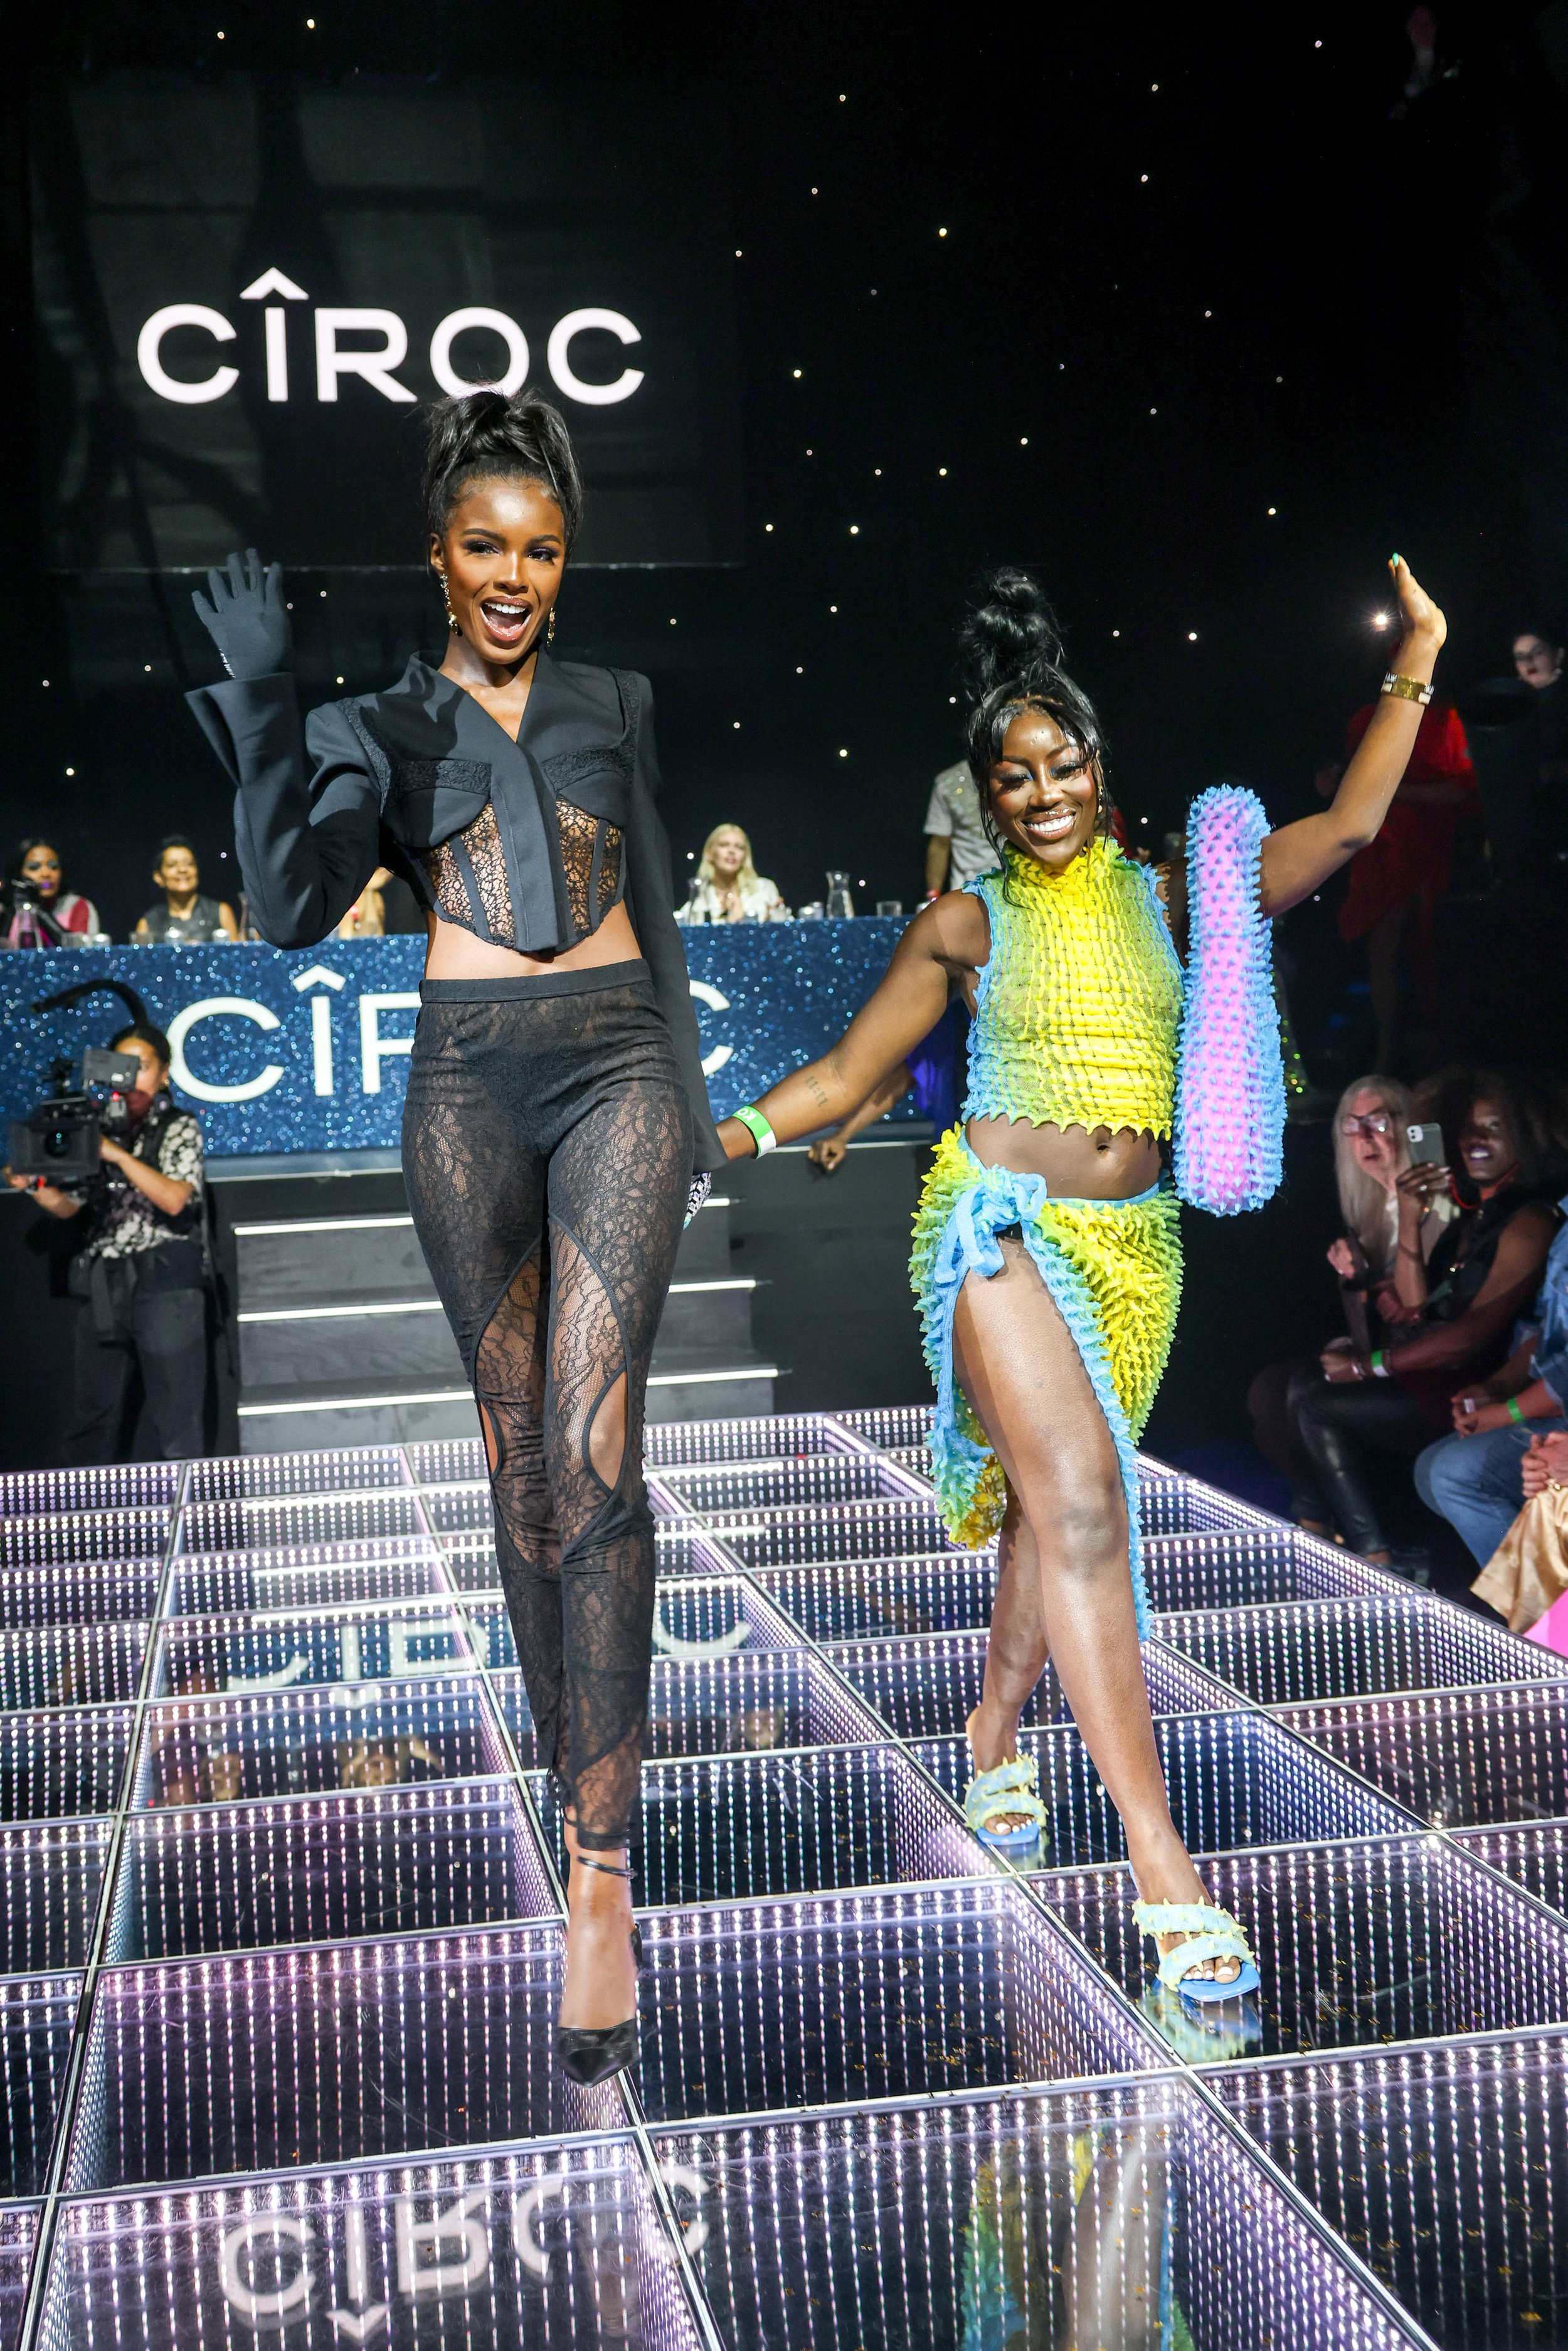  LONDON, ENGLAND - JUNE 30: Leomie Anderson and Bree Runway attend the CÎROC Iconic Ball in support of Not A Phase at KOKO on June 30, 2022 in London, England. Today, the first ever CÎROC Iconic Ball brought the house down at legendary KOKO Camden in